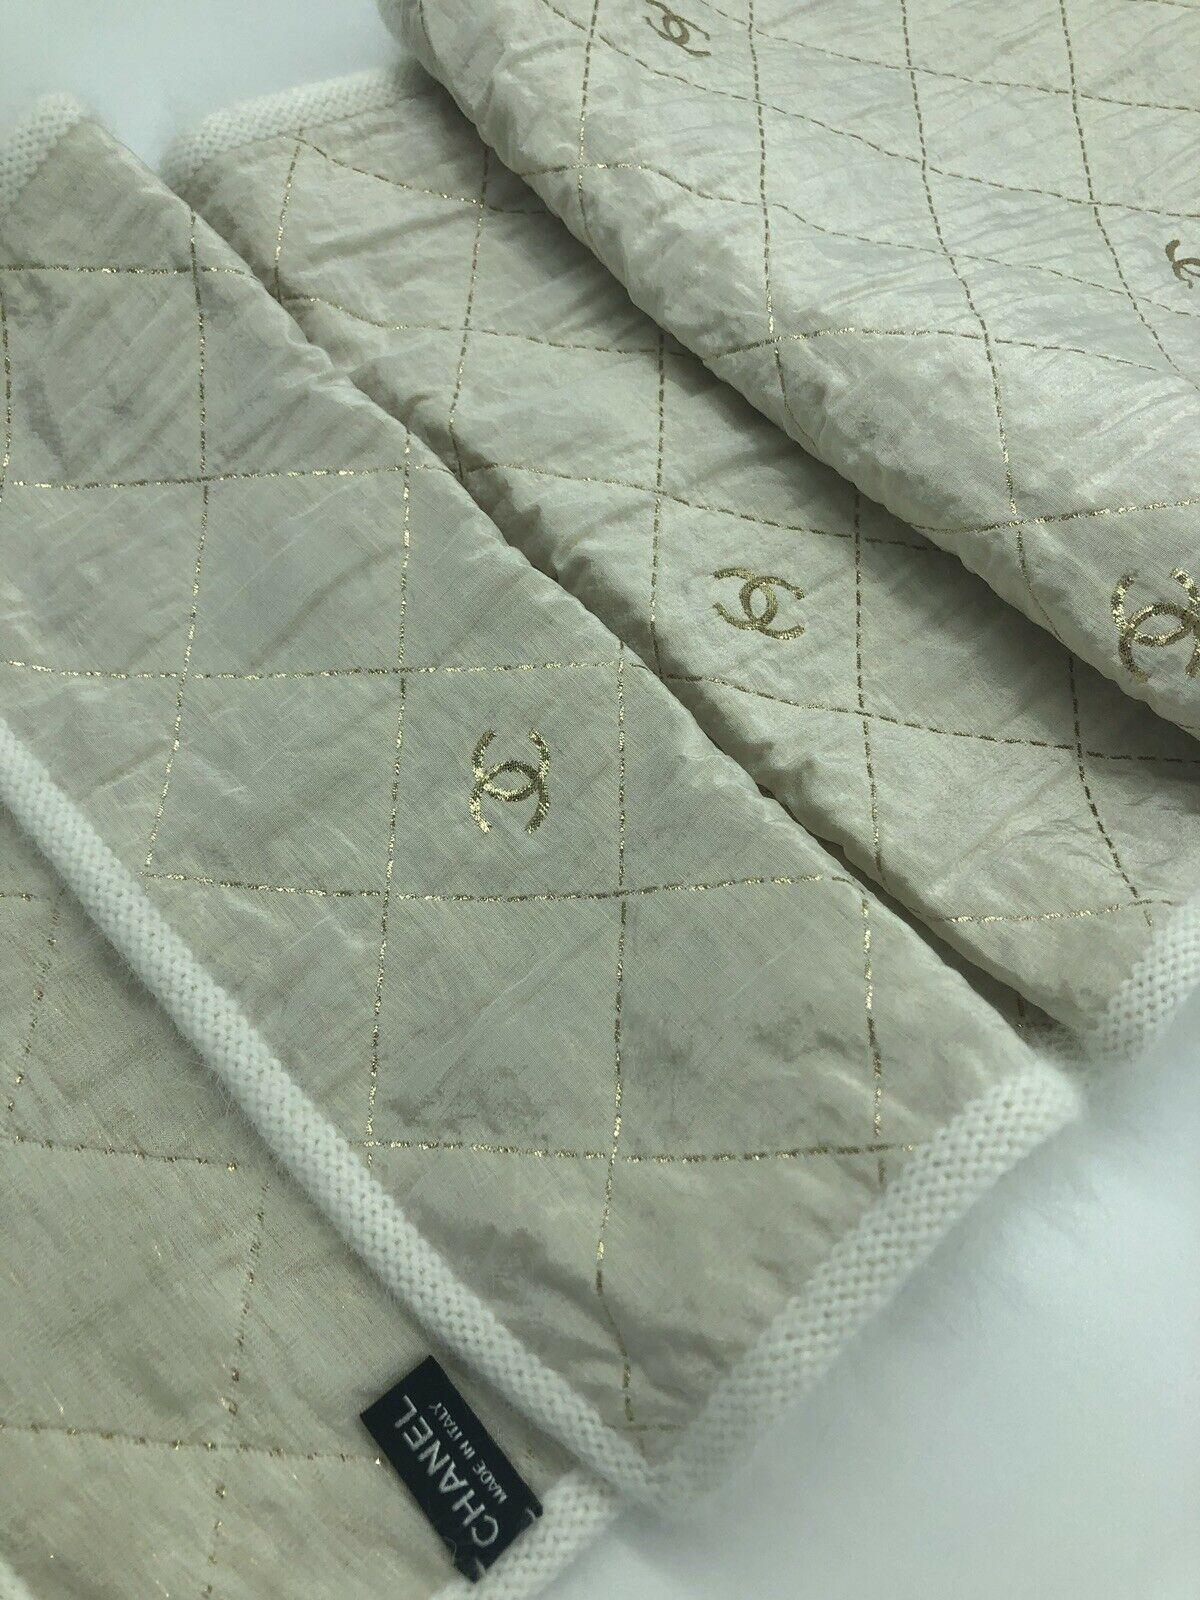 Gorgeous scarf by Chanel combined with iconic elements. The wool next to the Cream silk and finished with gold CC pattern is exquisite.

DETAILS:

Hand-finished edges
50% wool
20% silk
13% angora
8% cashmere
6% fibre
3% polyamide
80 inches X 12